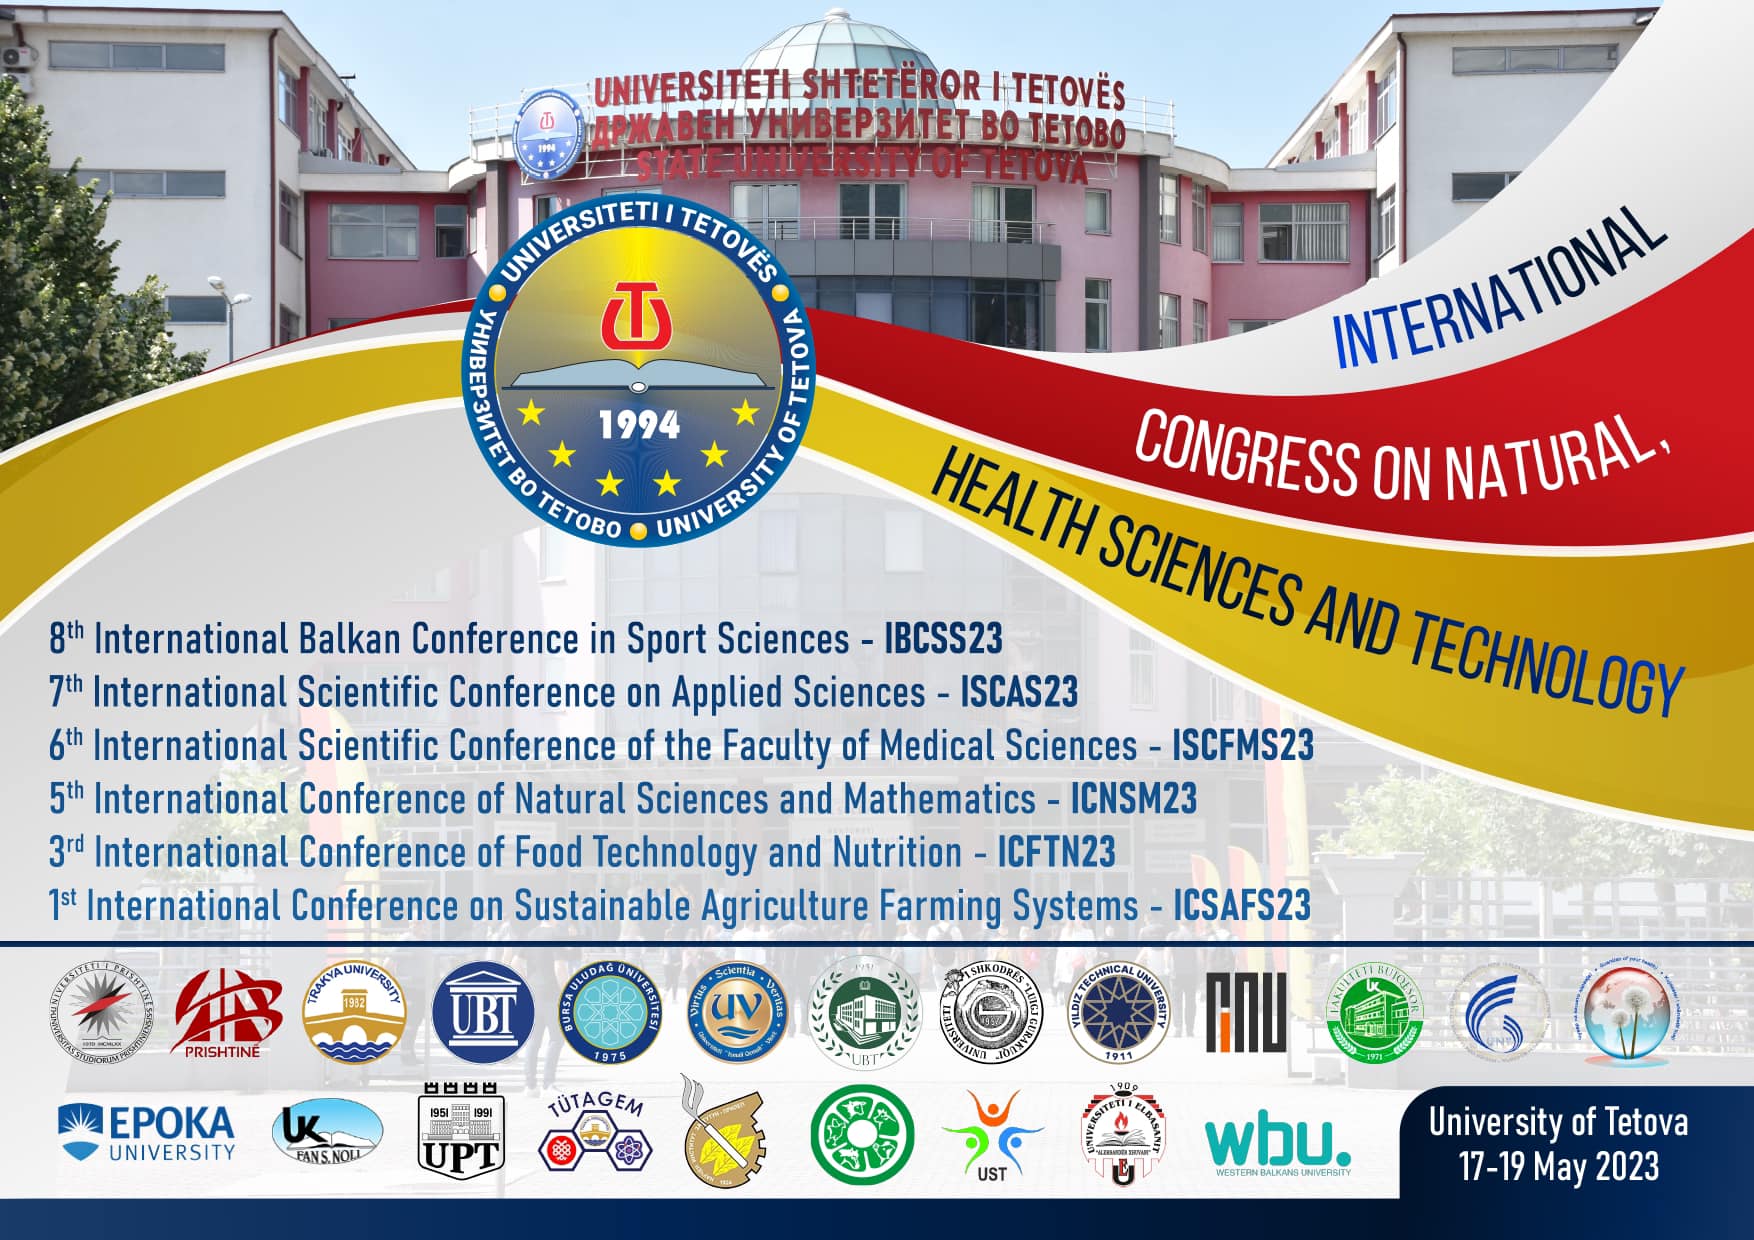 AAB College partner in the organization of the International Congress for Natural Sciences, Health and Technology